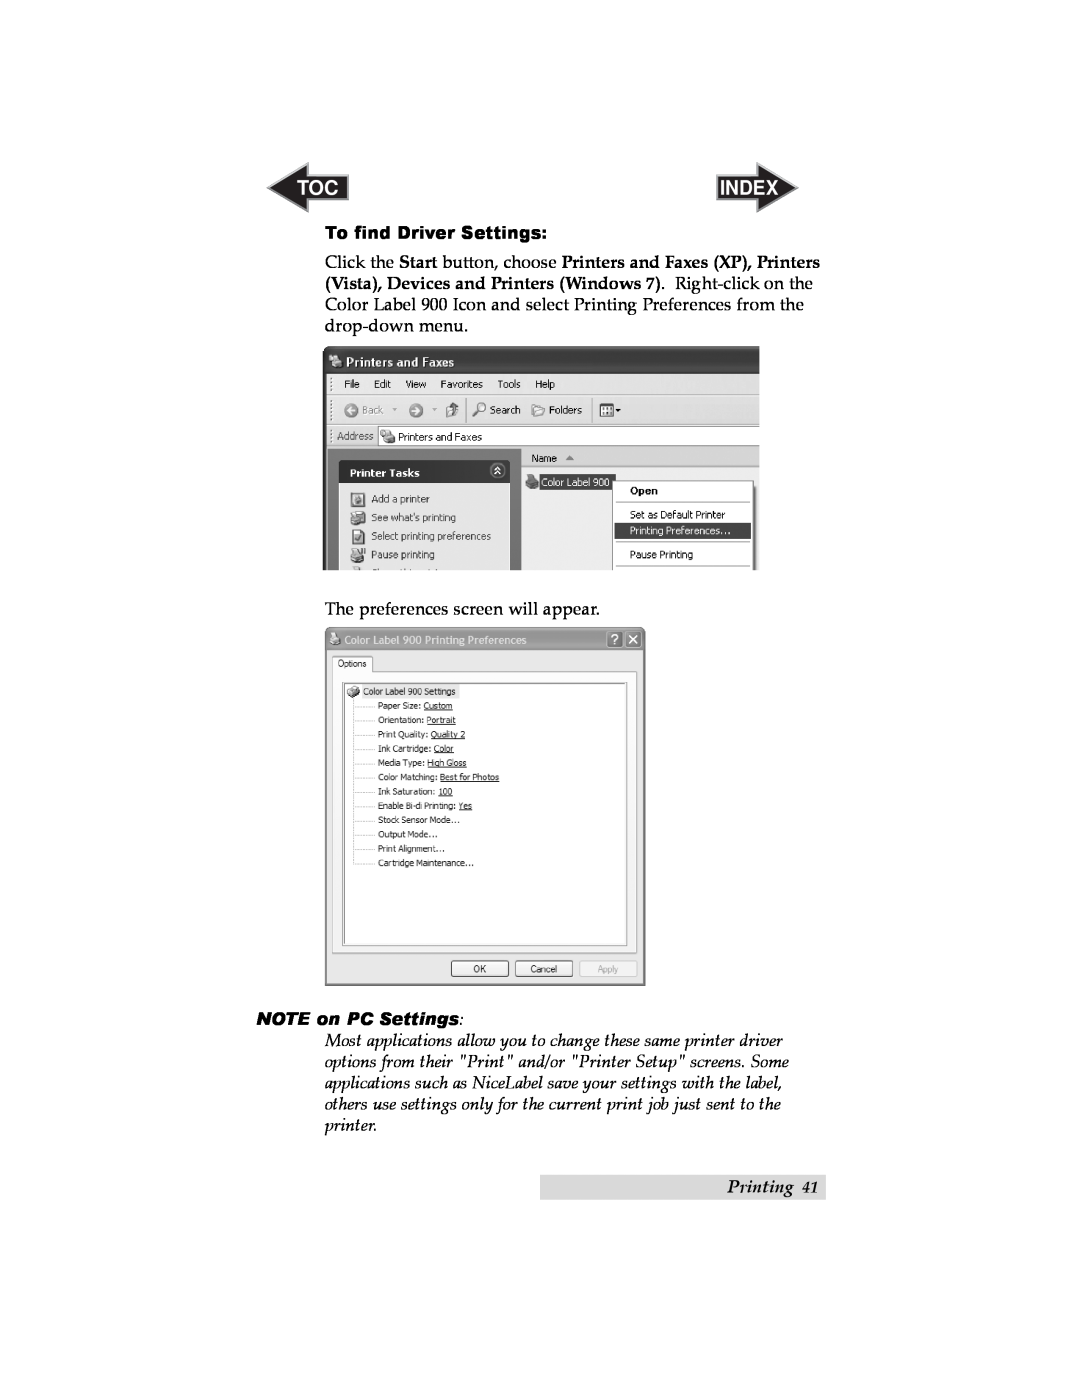 Primera Technology RX900 user manual To find Driver Settings, Index, NOTE on PC Settings, Printing 